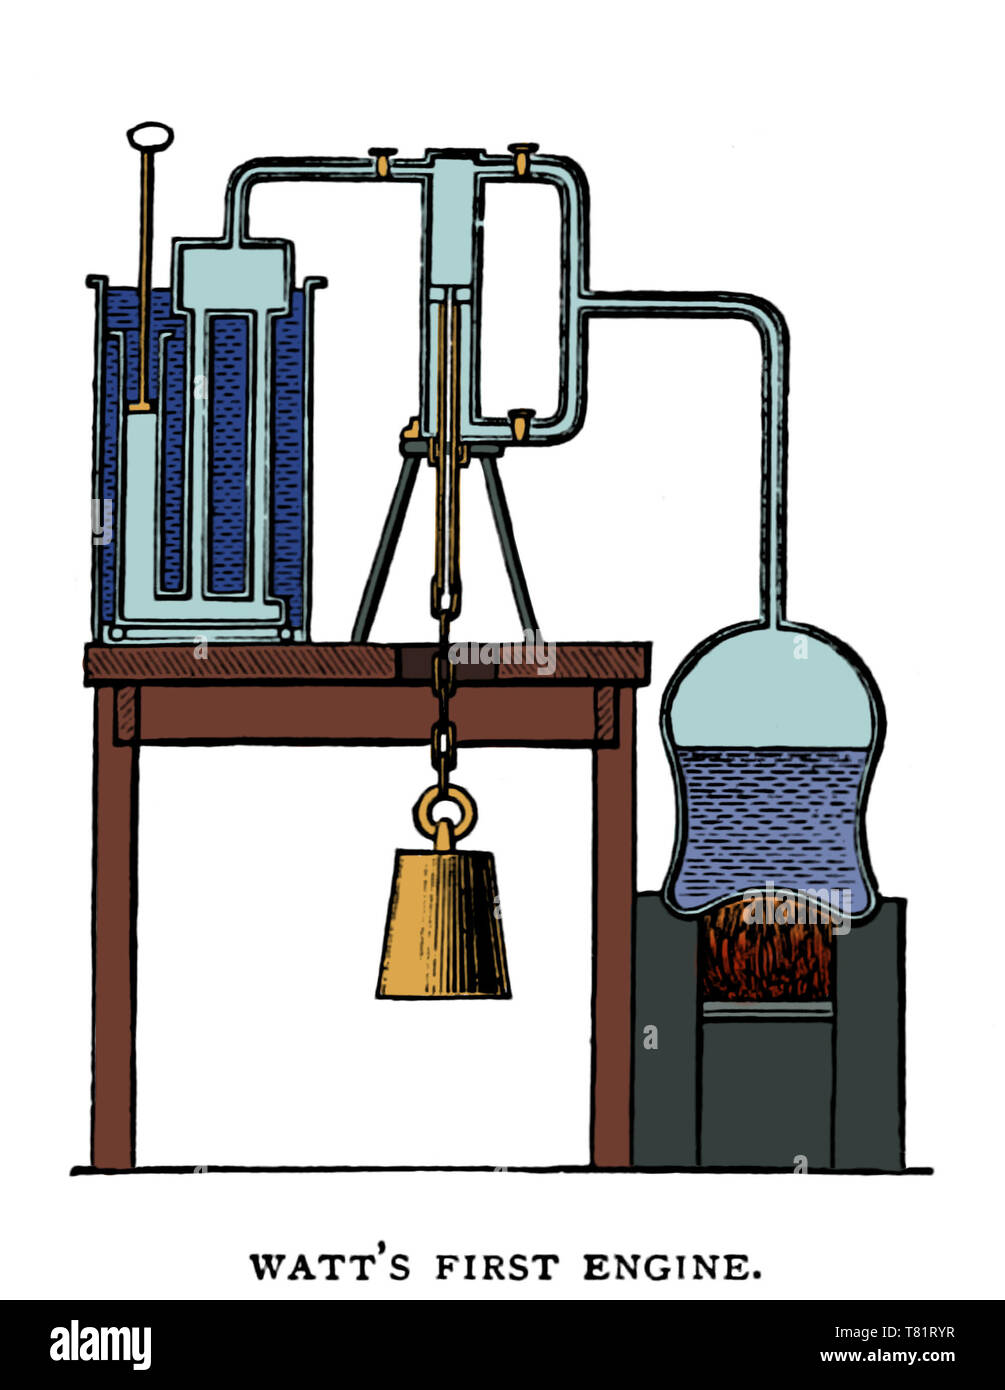 James watt and the invention of the steam engine фото 46